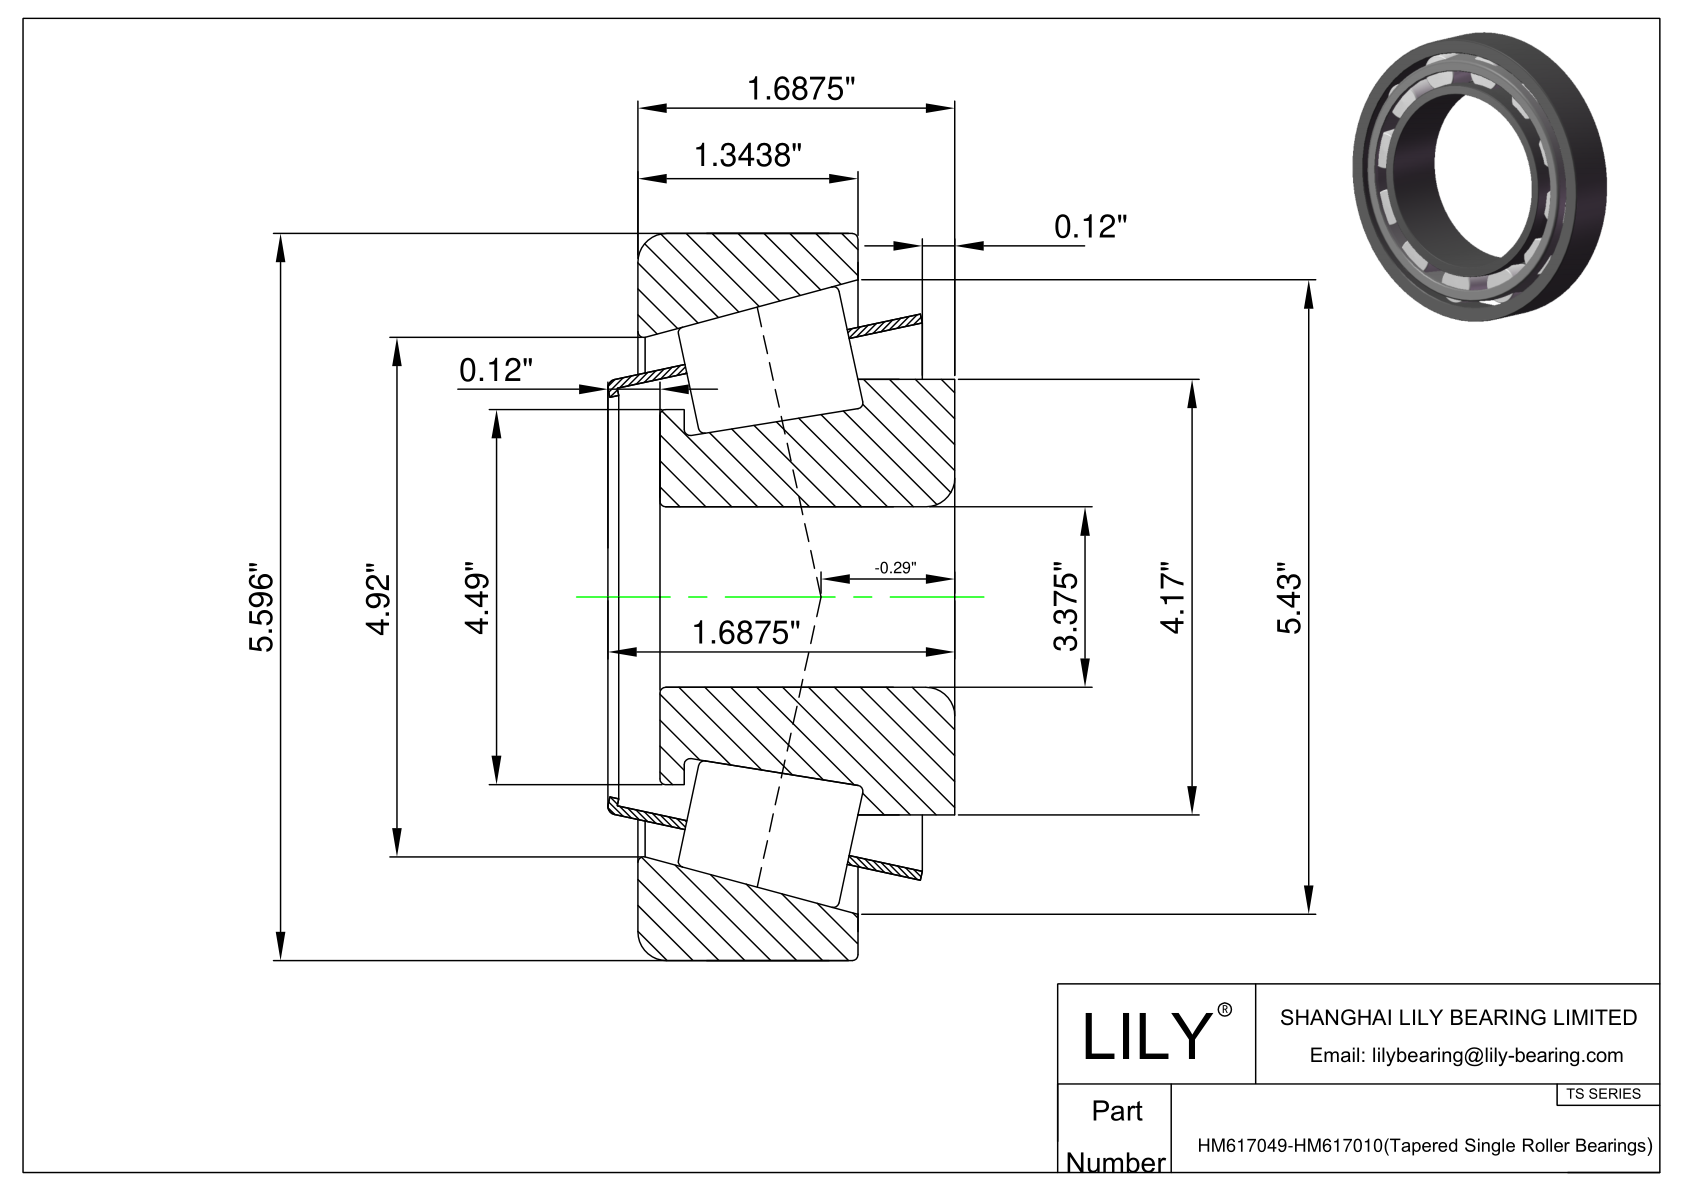 HM617049-HM617010 TS (Tapered Single Roller Bearings) (Imperial) cad drawing